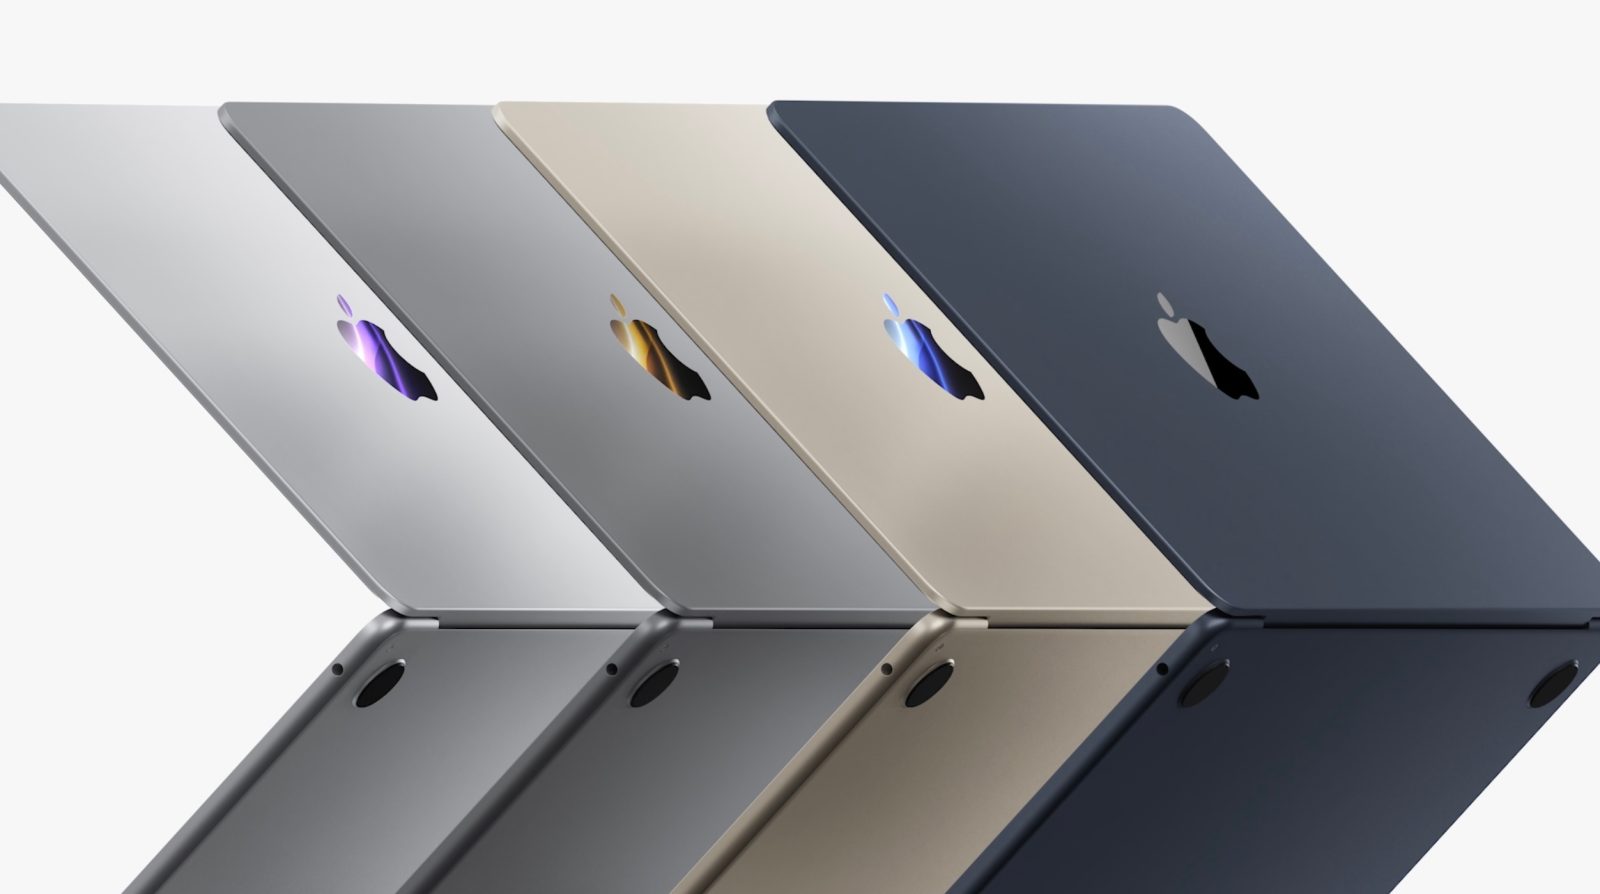 MacBook Air redesign in silver, space gray, starlight, and midnight colors